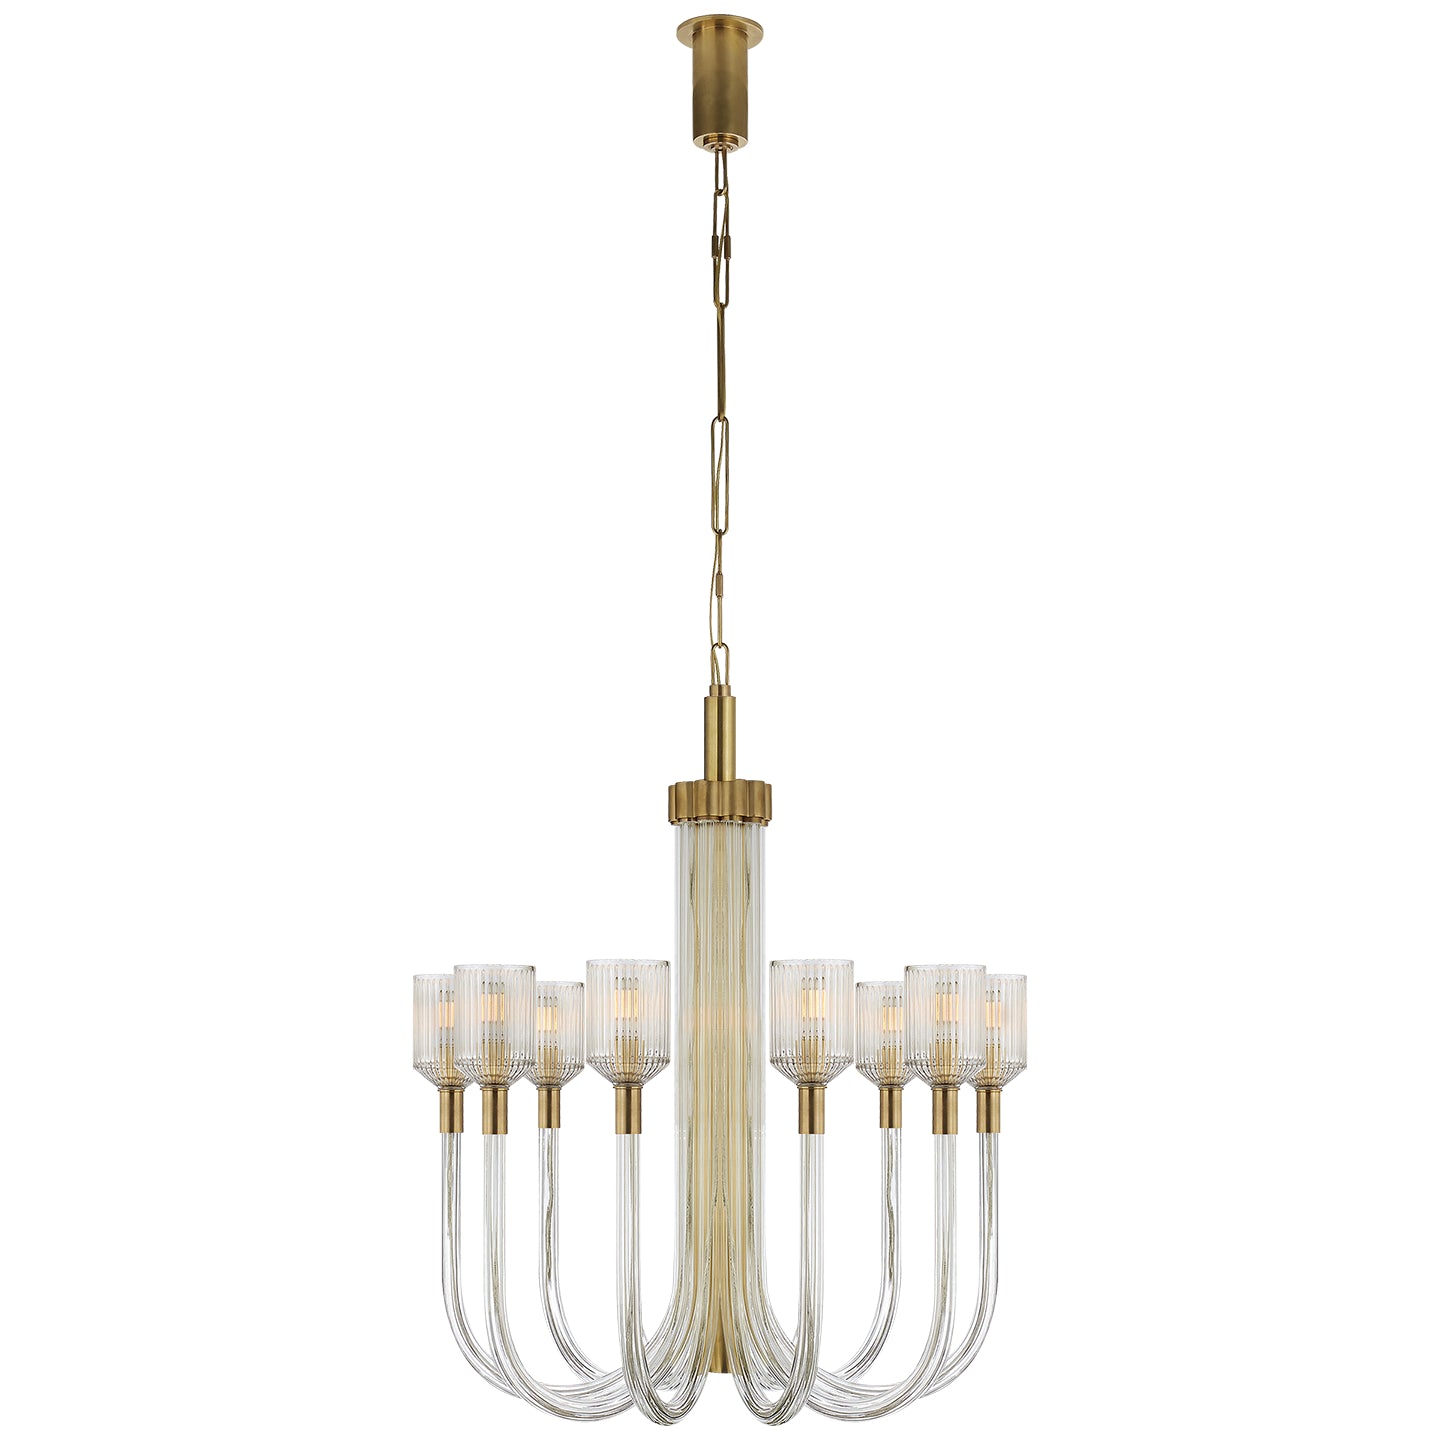 Visual Comfort Signature - KW 5401CRB/AB - Ten Light Chandelier - Reverie - Clear Ribbed Glass and Brass